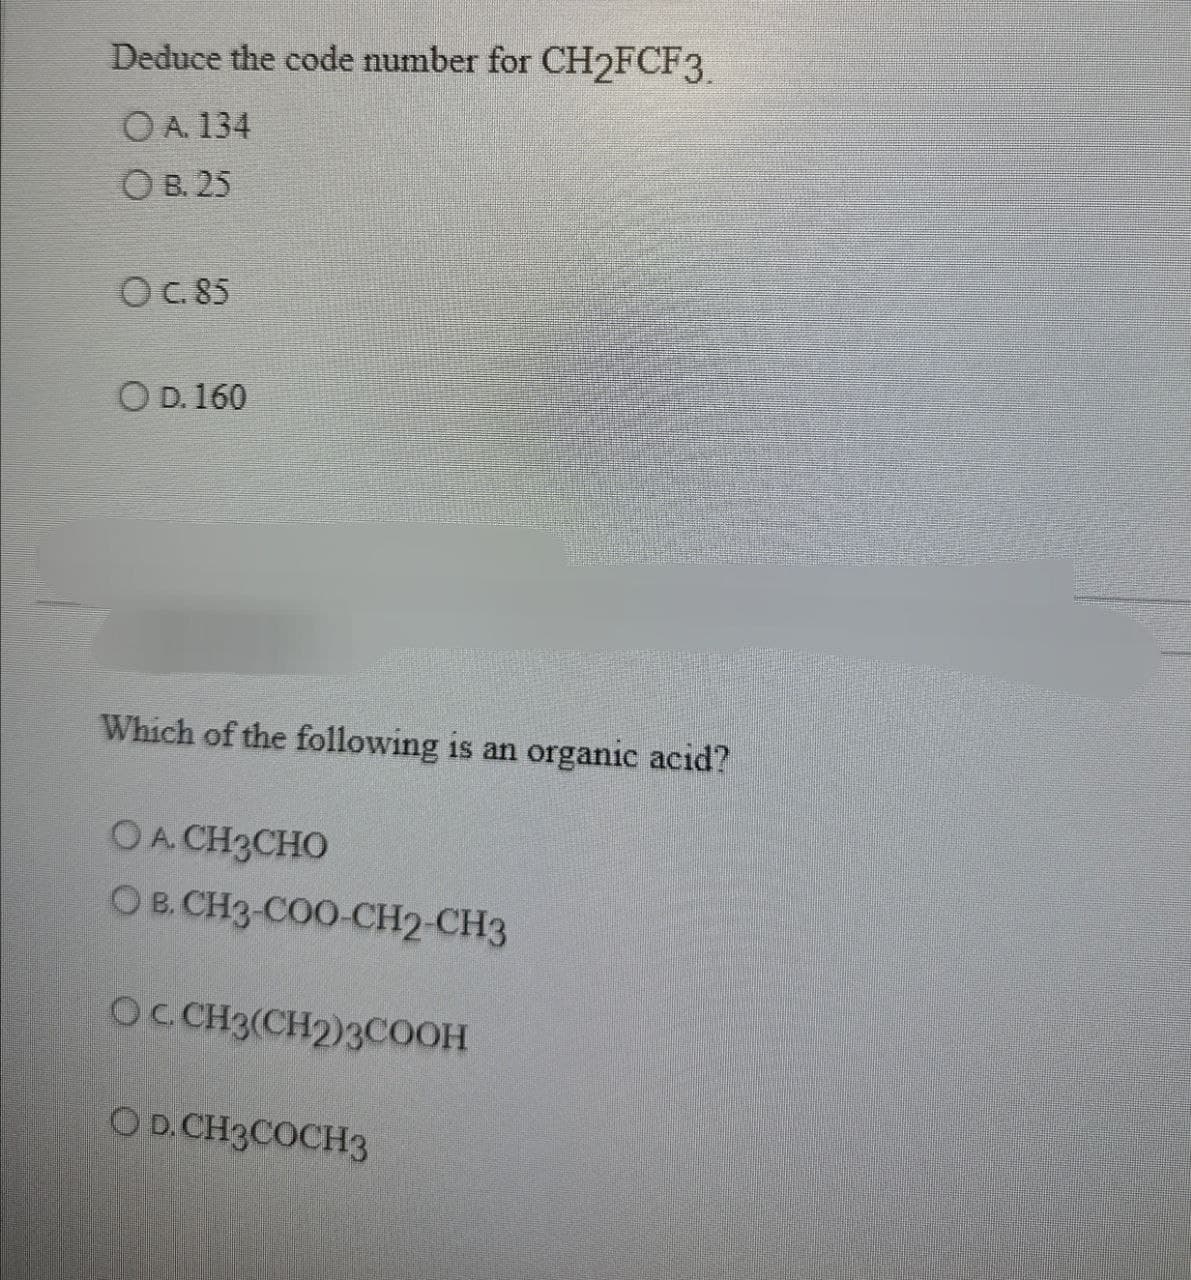 Deduce the code number for CH2FCF3.
OA. 134
OB. 25
OC. 85
OD. 160
Which of the following is an organic acid?
OA. CH3CHO
OB. CH3-COO-CH2-CH3
OC. CH3(CH2)3COOH
OD. CH3COCH3